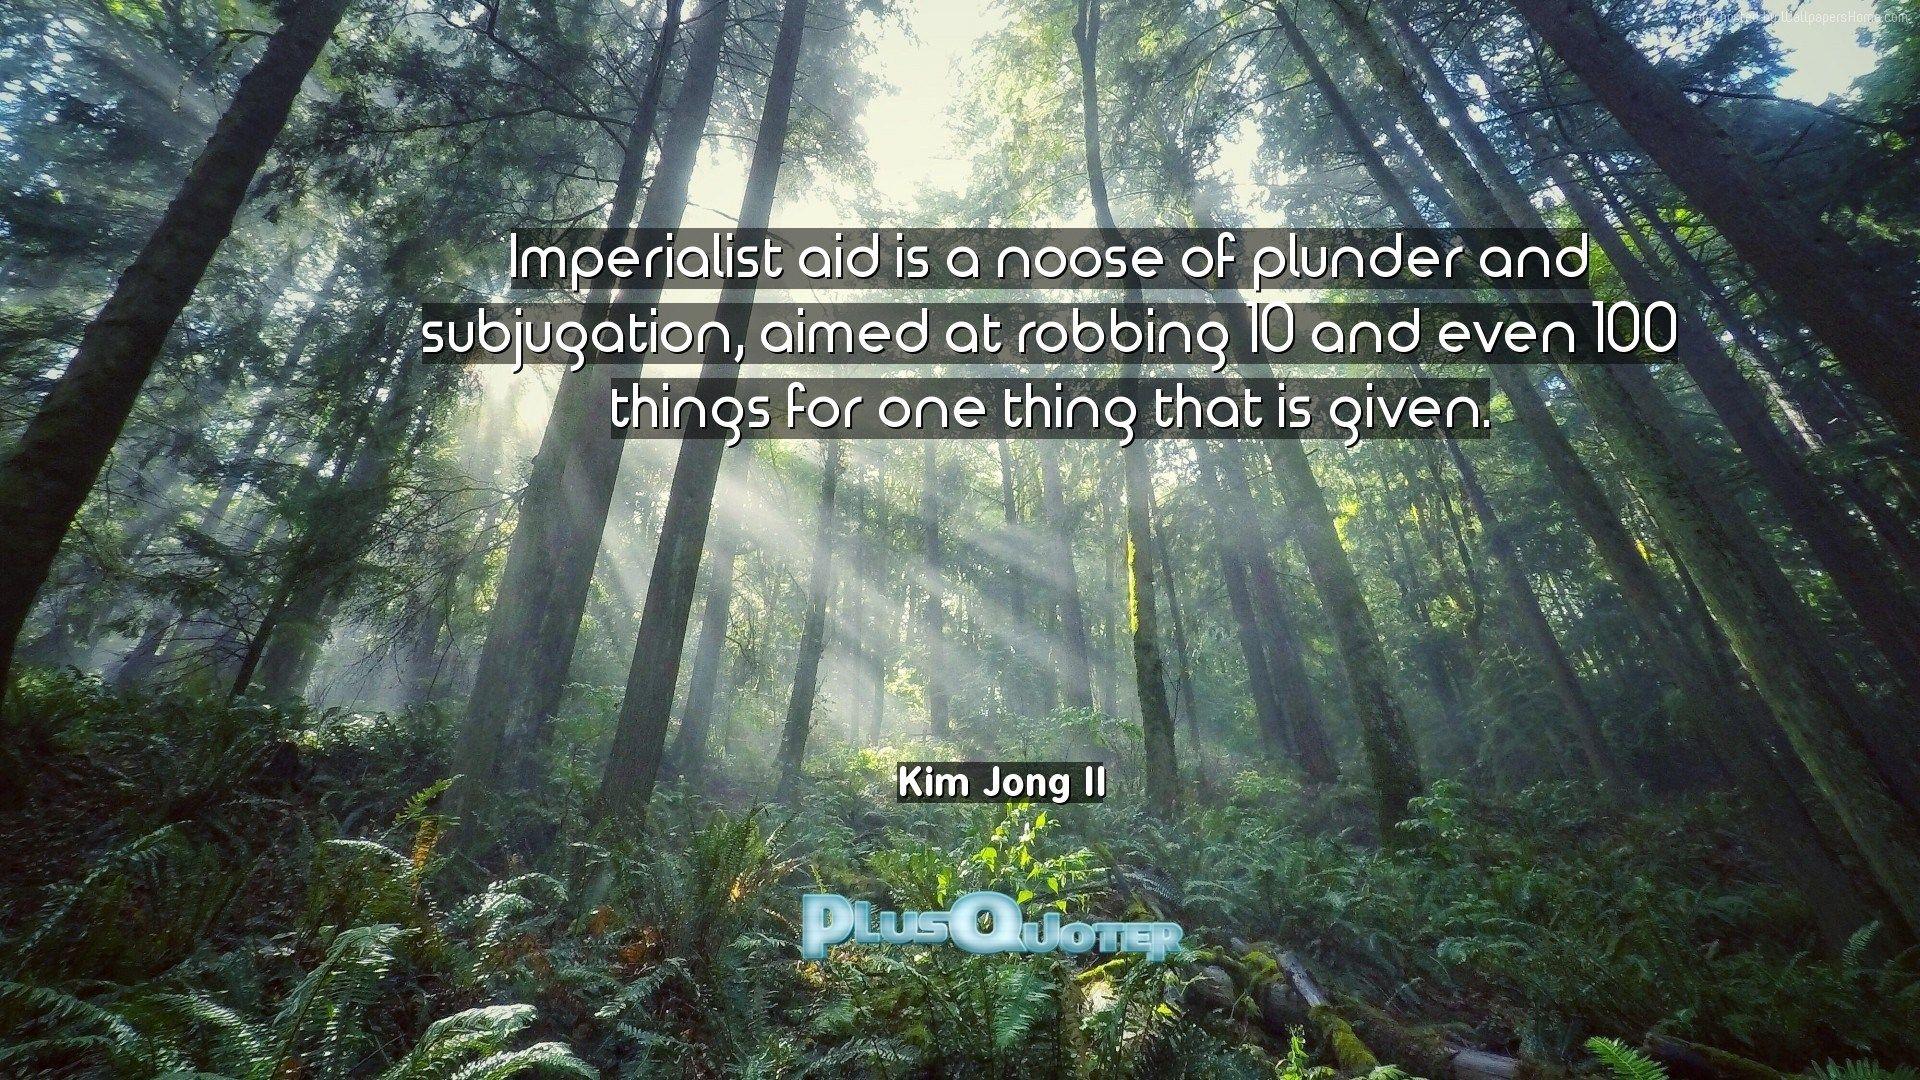 Imperialist aid is a noose of plunder and subjugation, aimed at